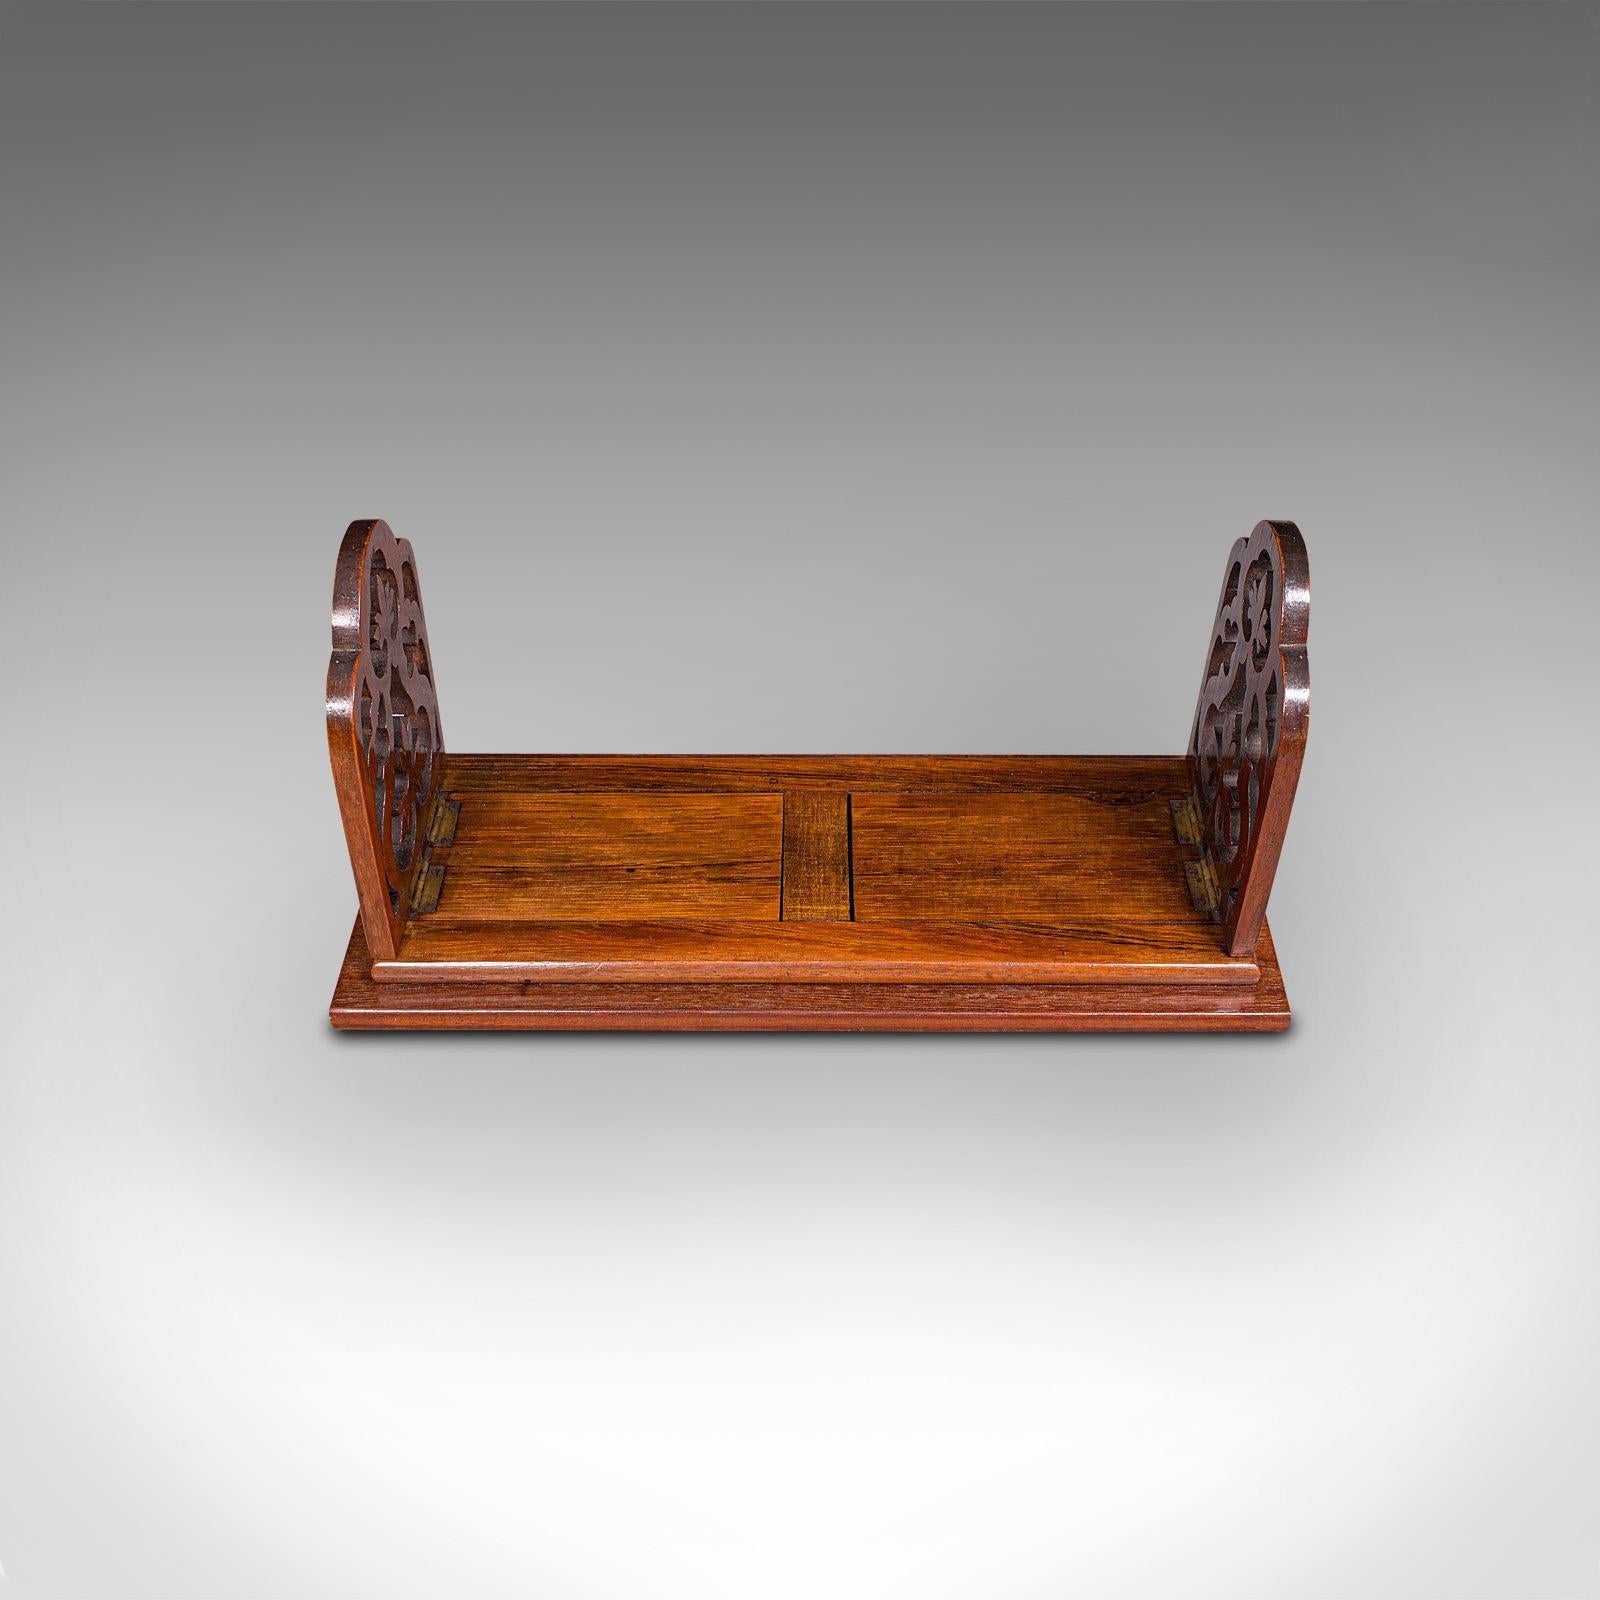 19th Century Antique Book Slide, English, Rosewood, Mahogany, Library Stand, Victorian, 1900